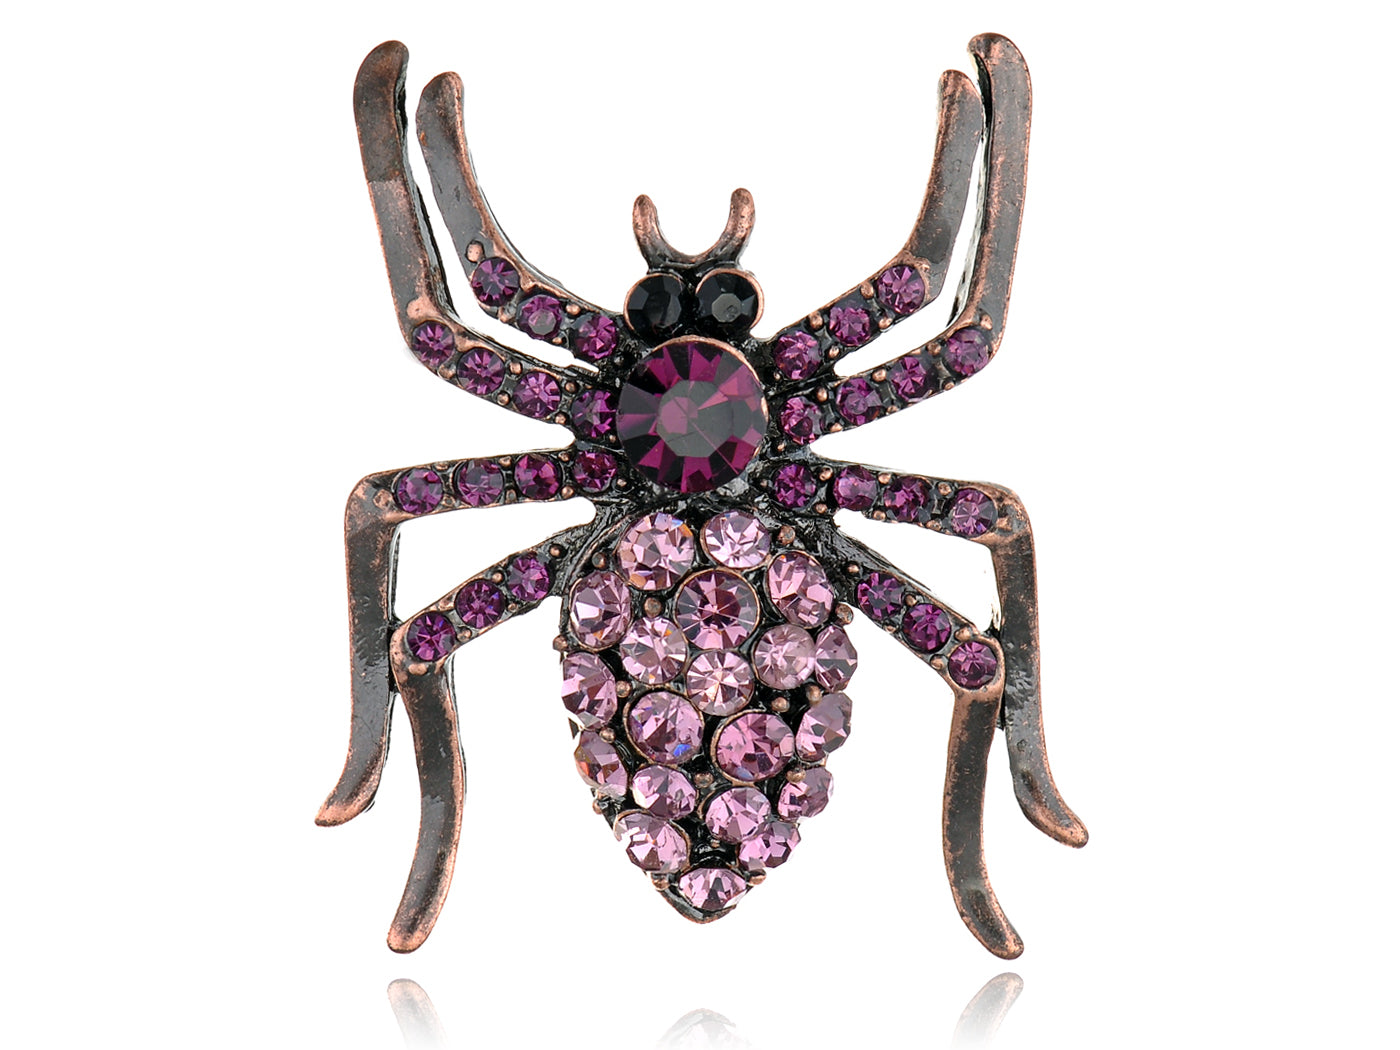 Amethyst Dazzling Purple Spider Bug Insect Pin Brooch